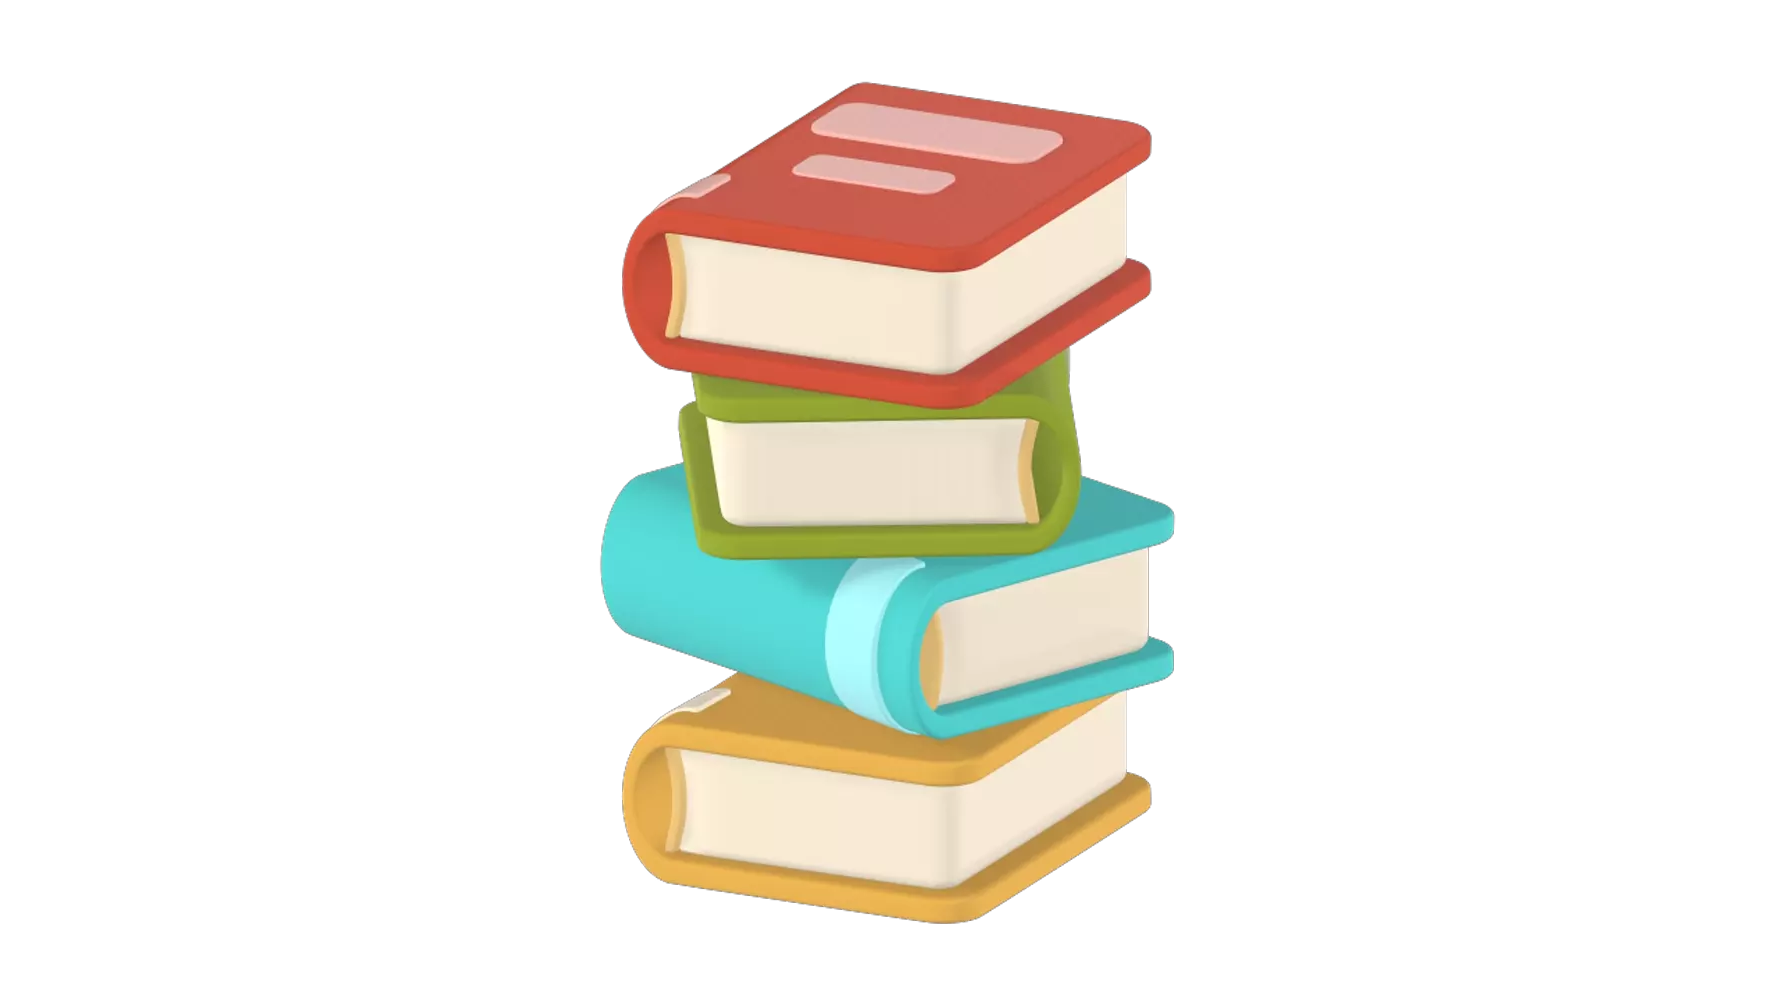 Pile Of Books 3D Graphic